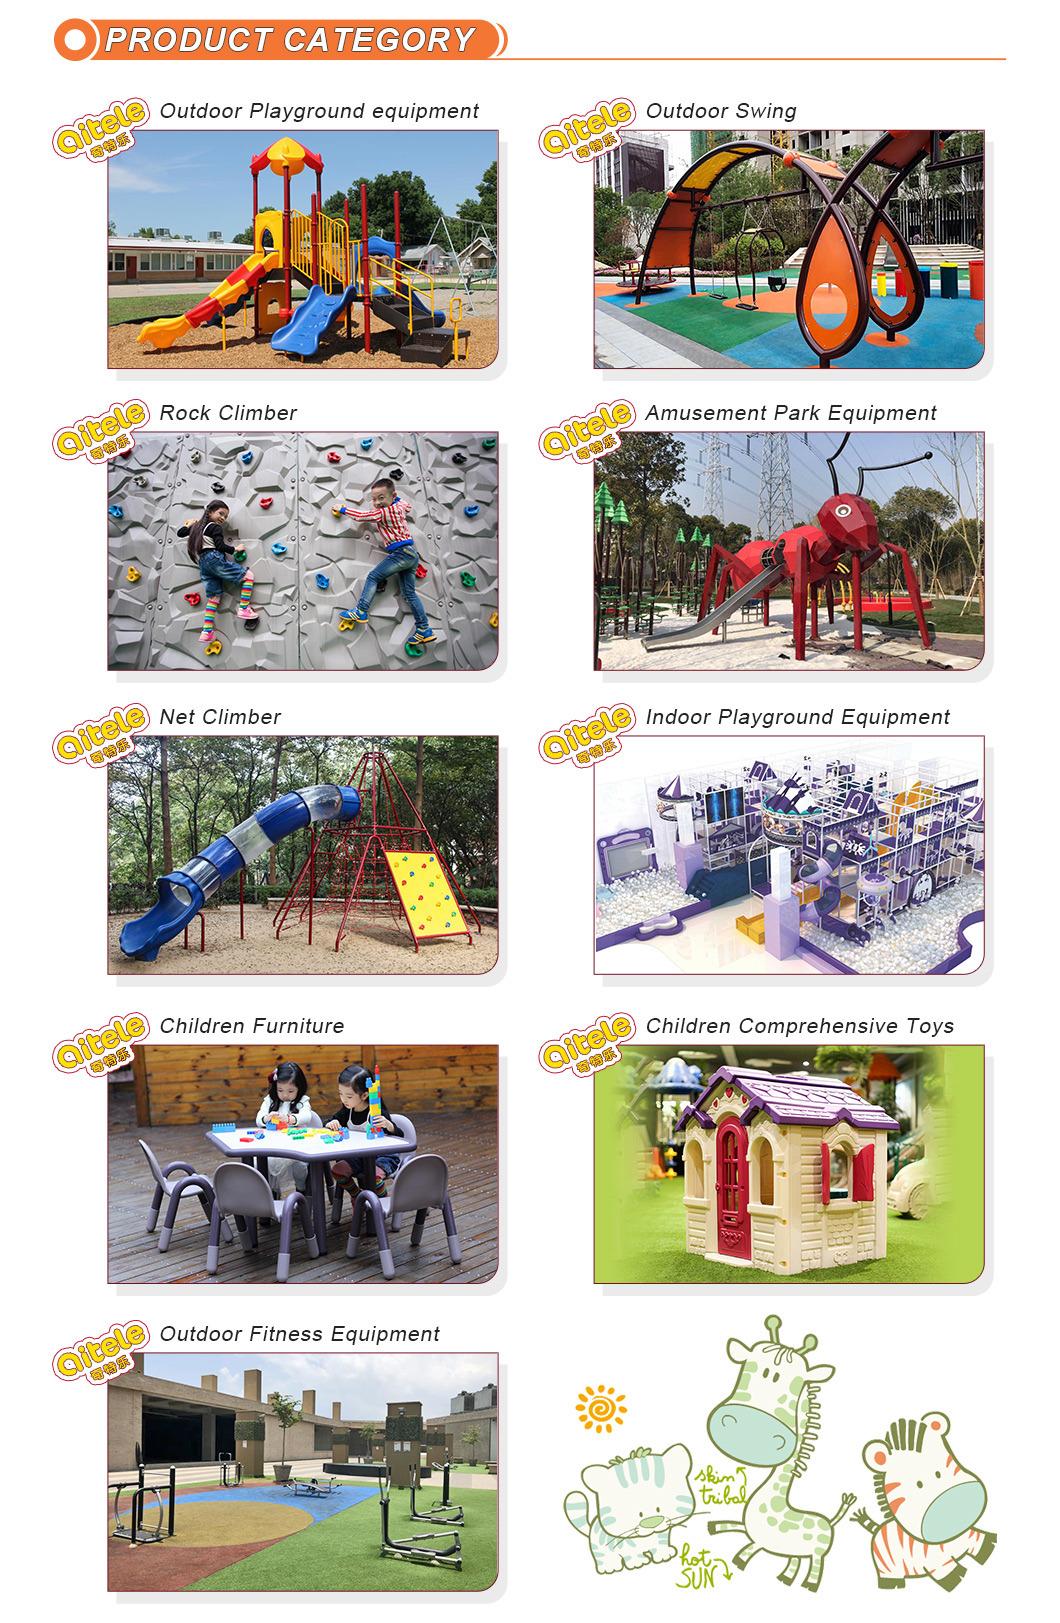 Physical Outdoor Playground Equipment with Climber